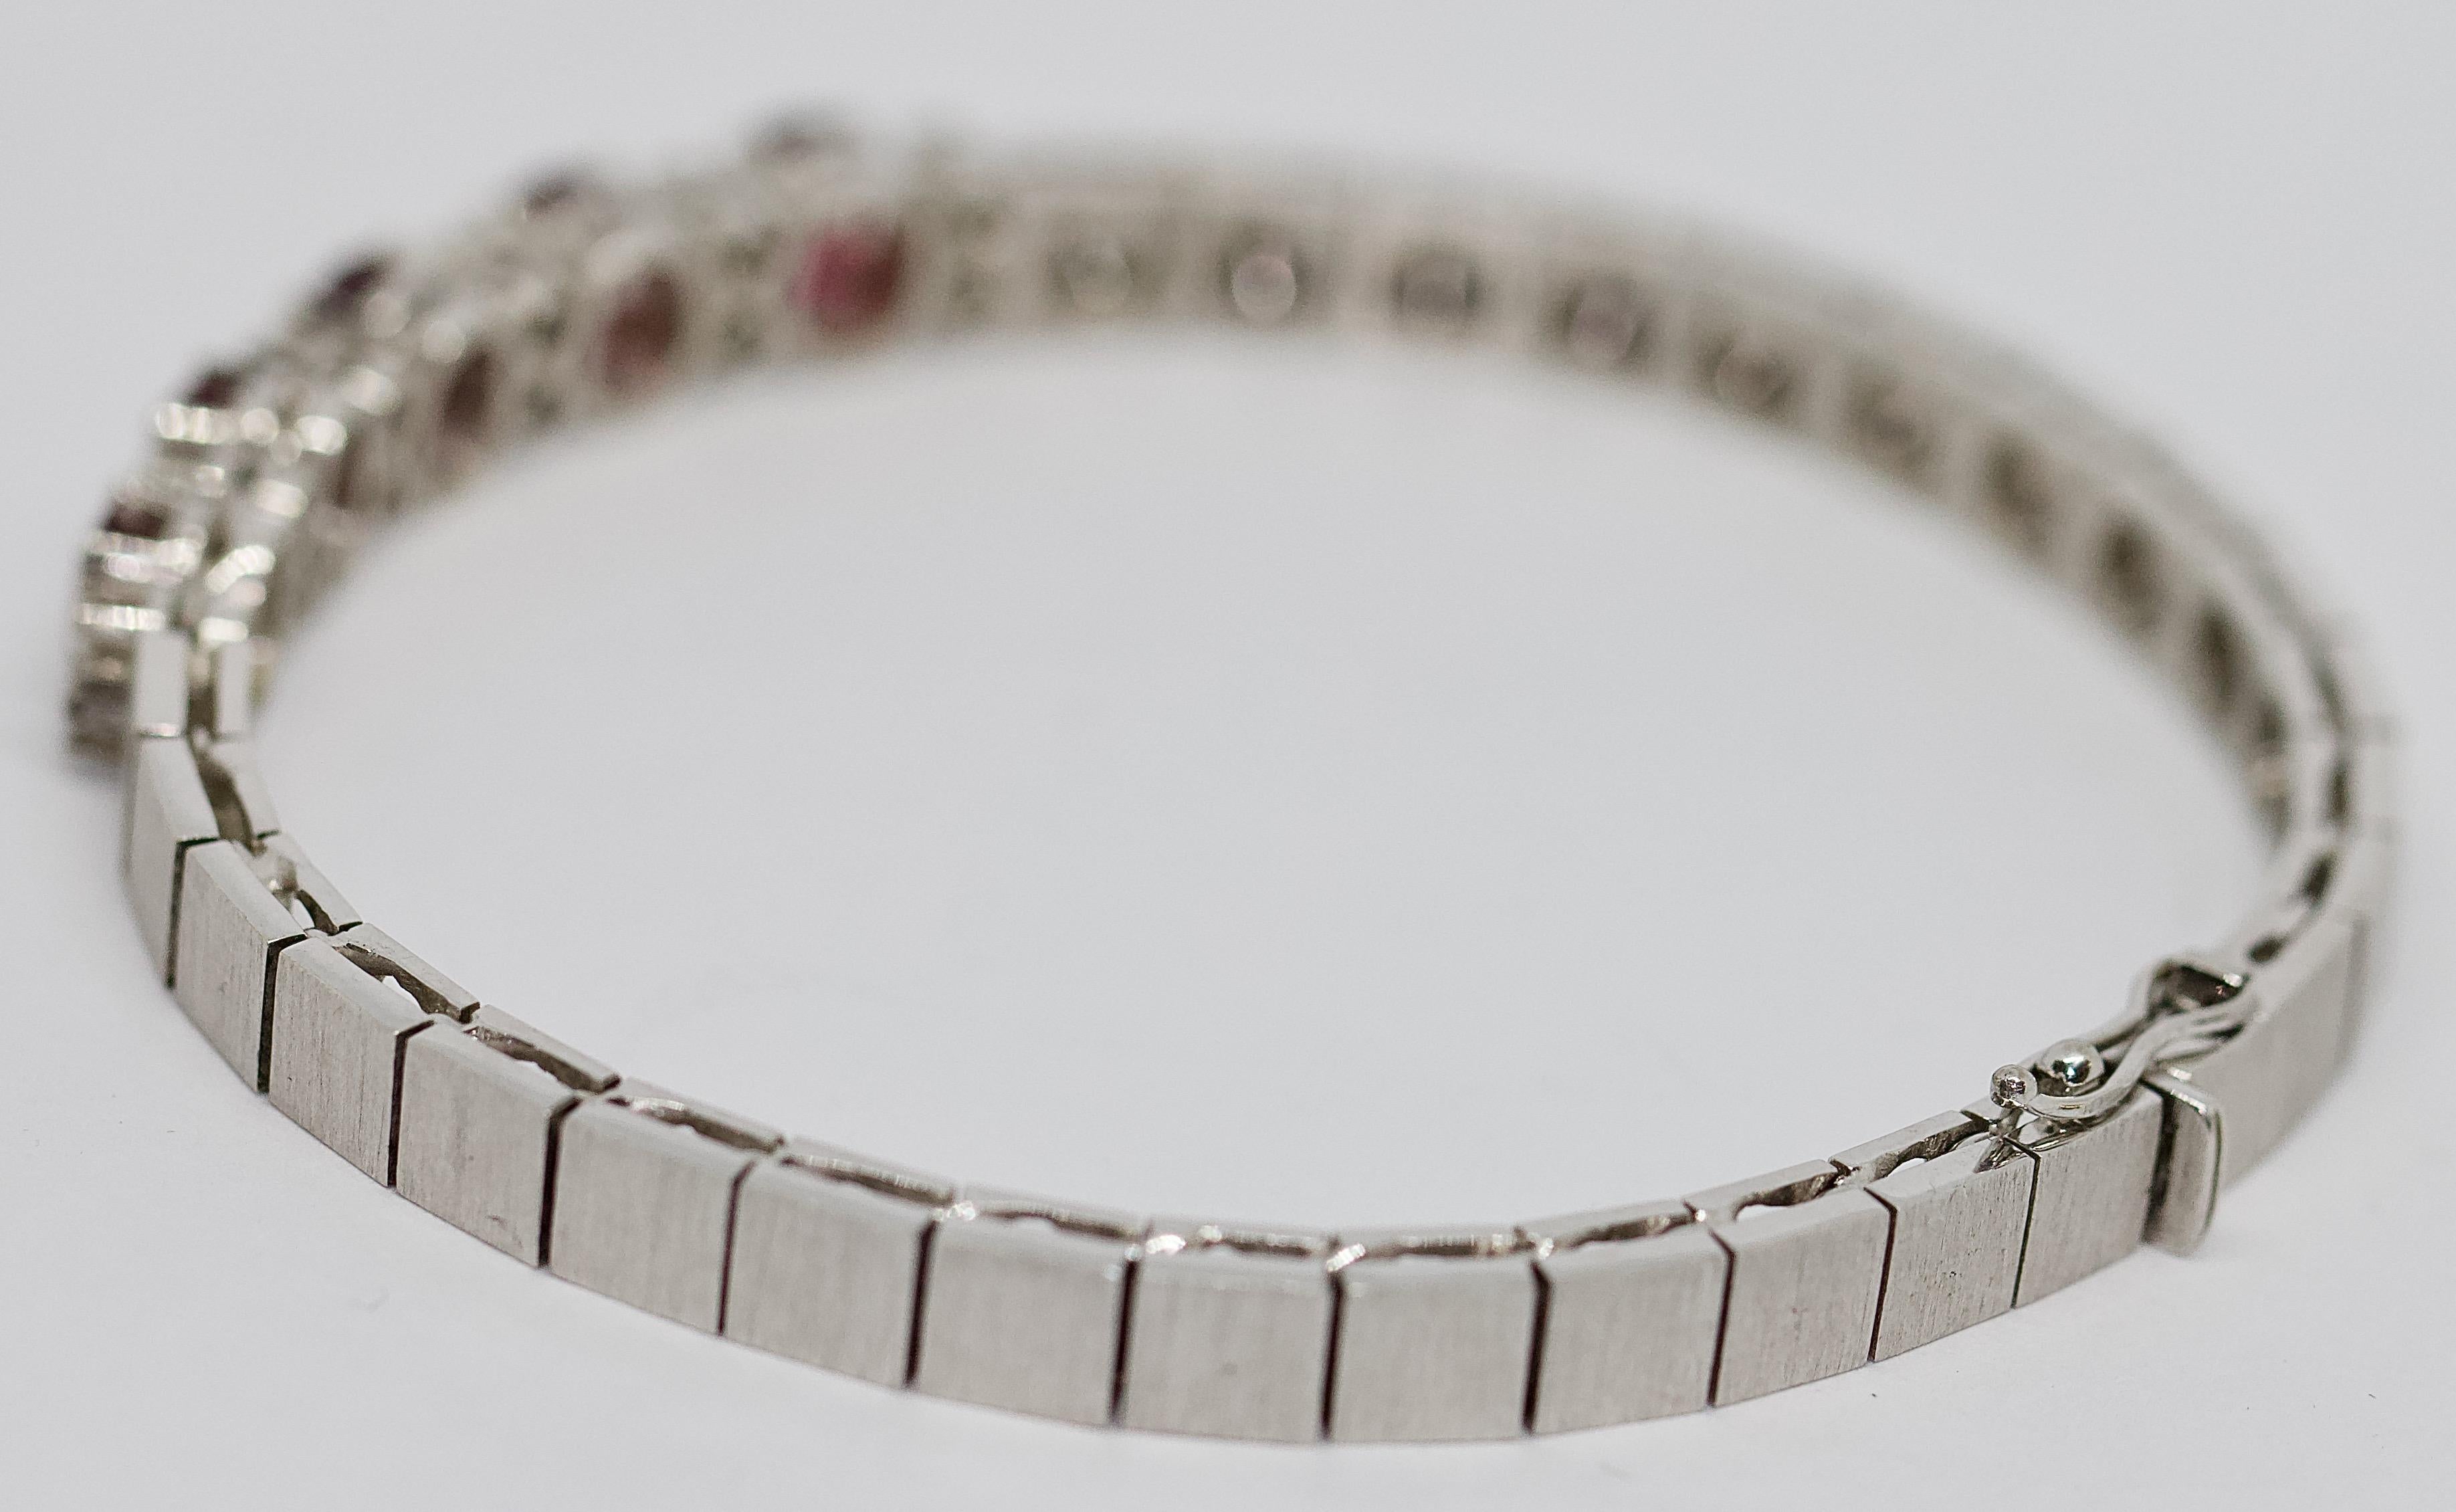 Ladies White Gold Tennis Bracelet with Rubies and Diamonds In Good Condition For Sale In Berlin, DE